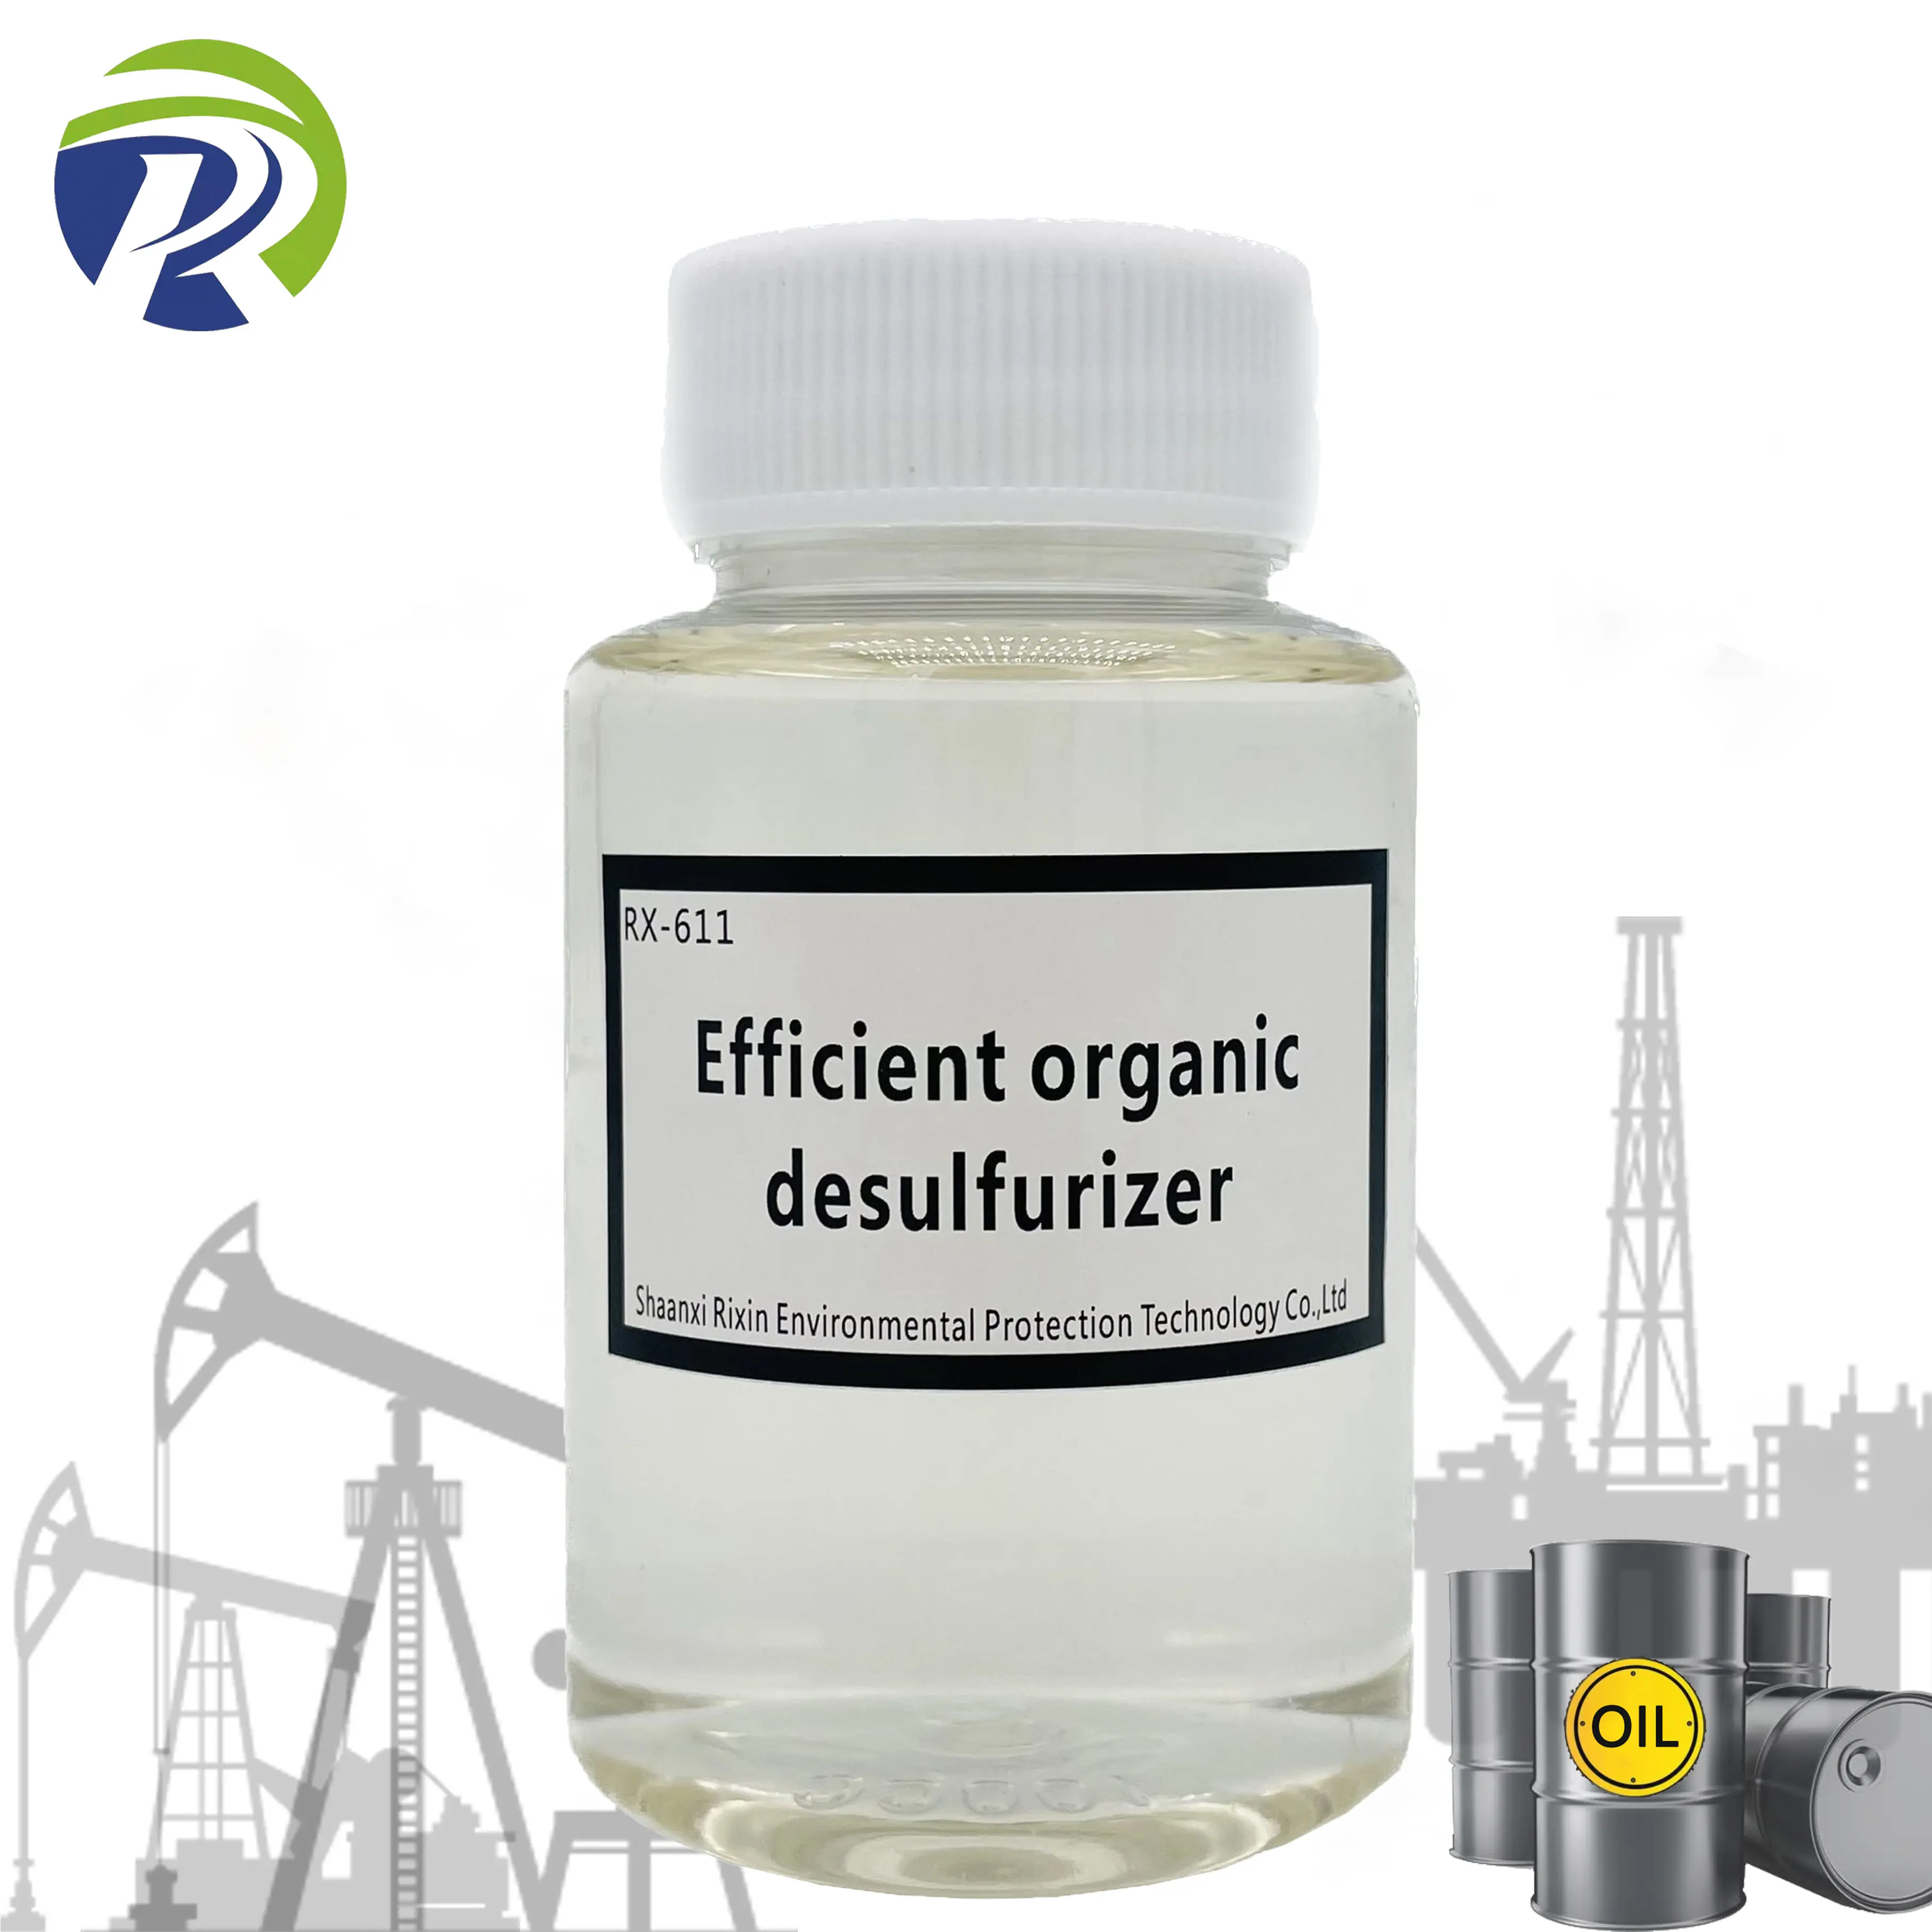 Efficient organic sulfur removal agent cleans the fuel, purify the environment,sulphur scavenger